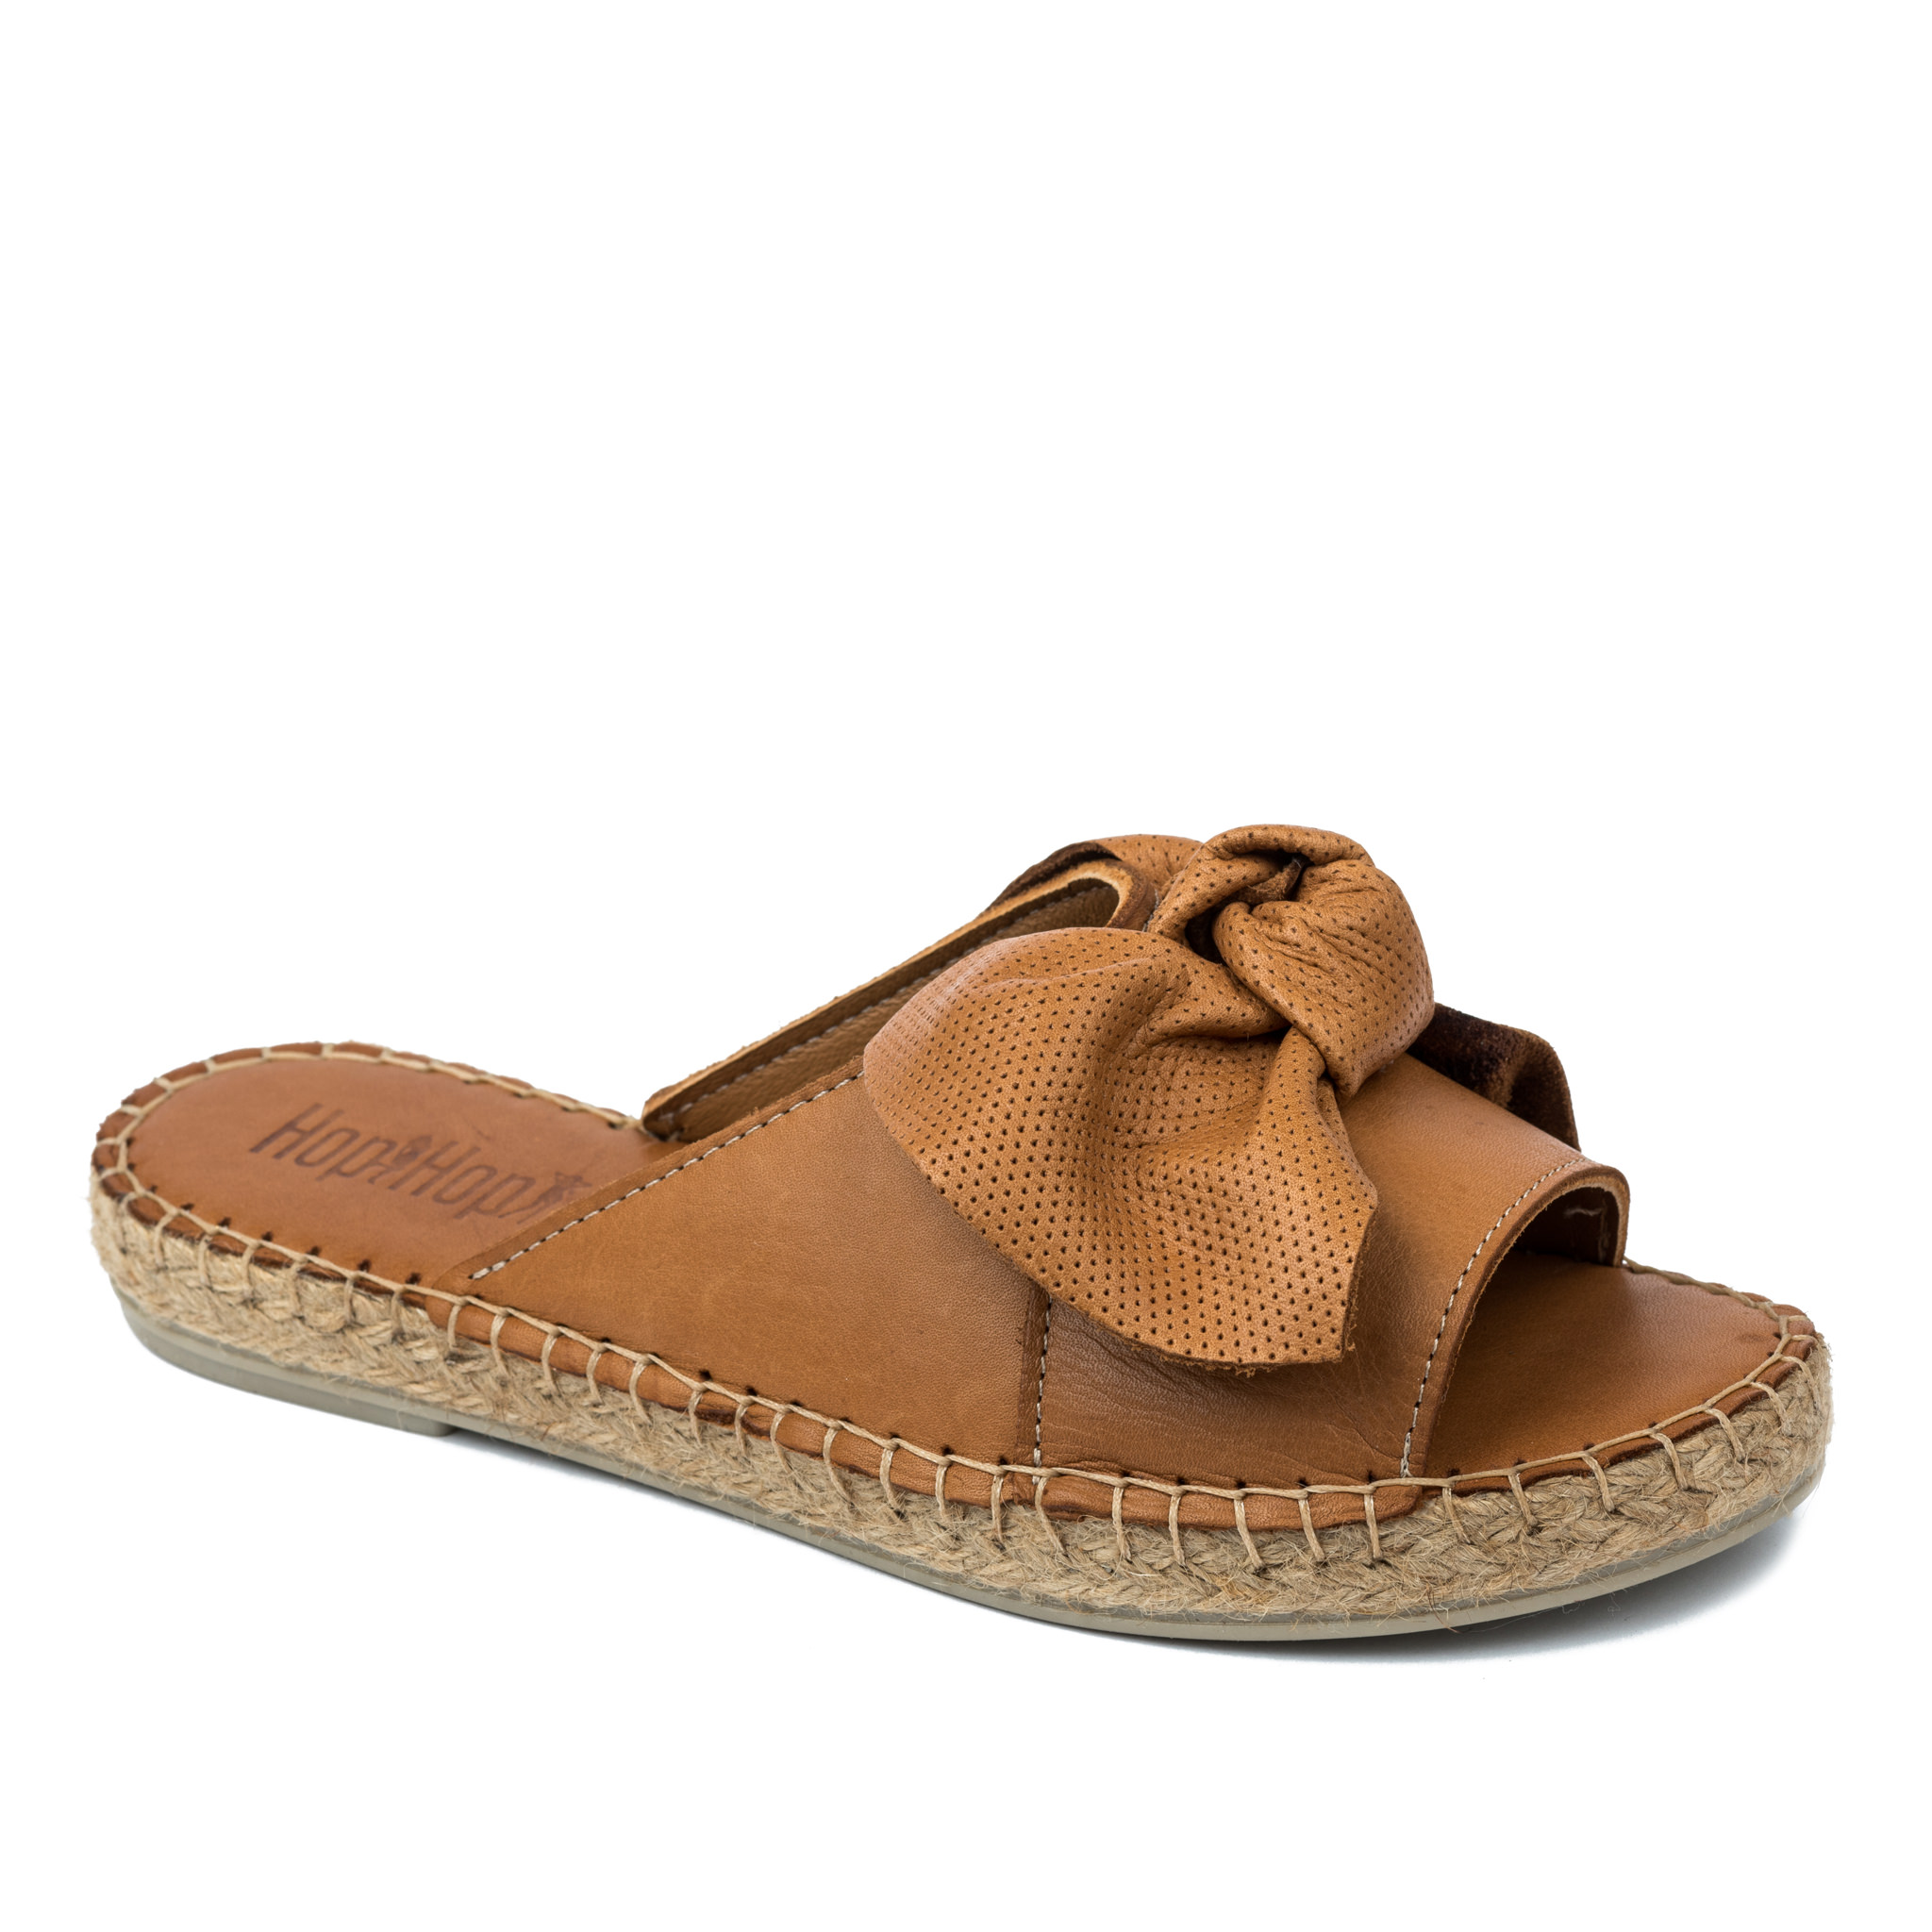 Leather slippers A689 - CAMEL